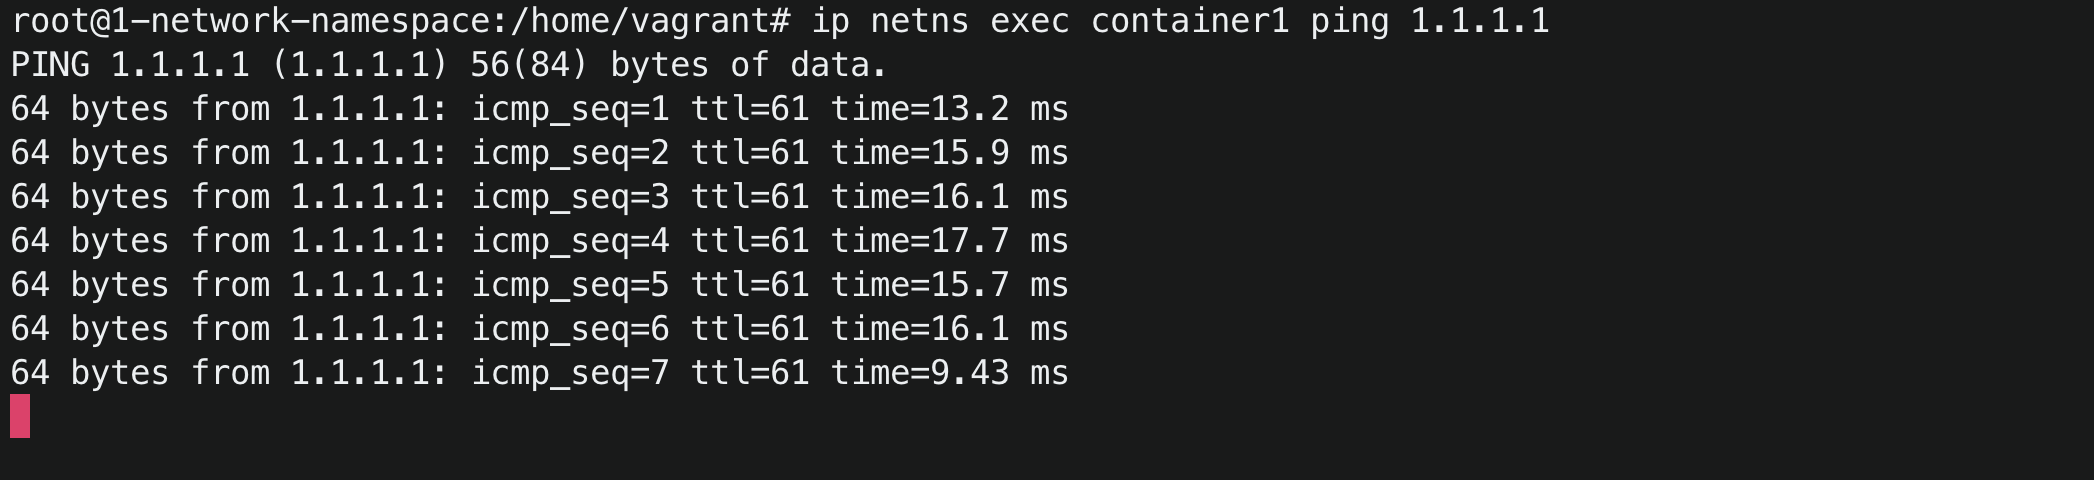 Ping internet from container1 success